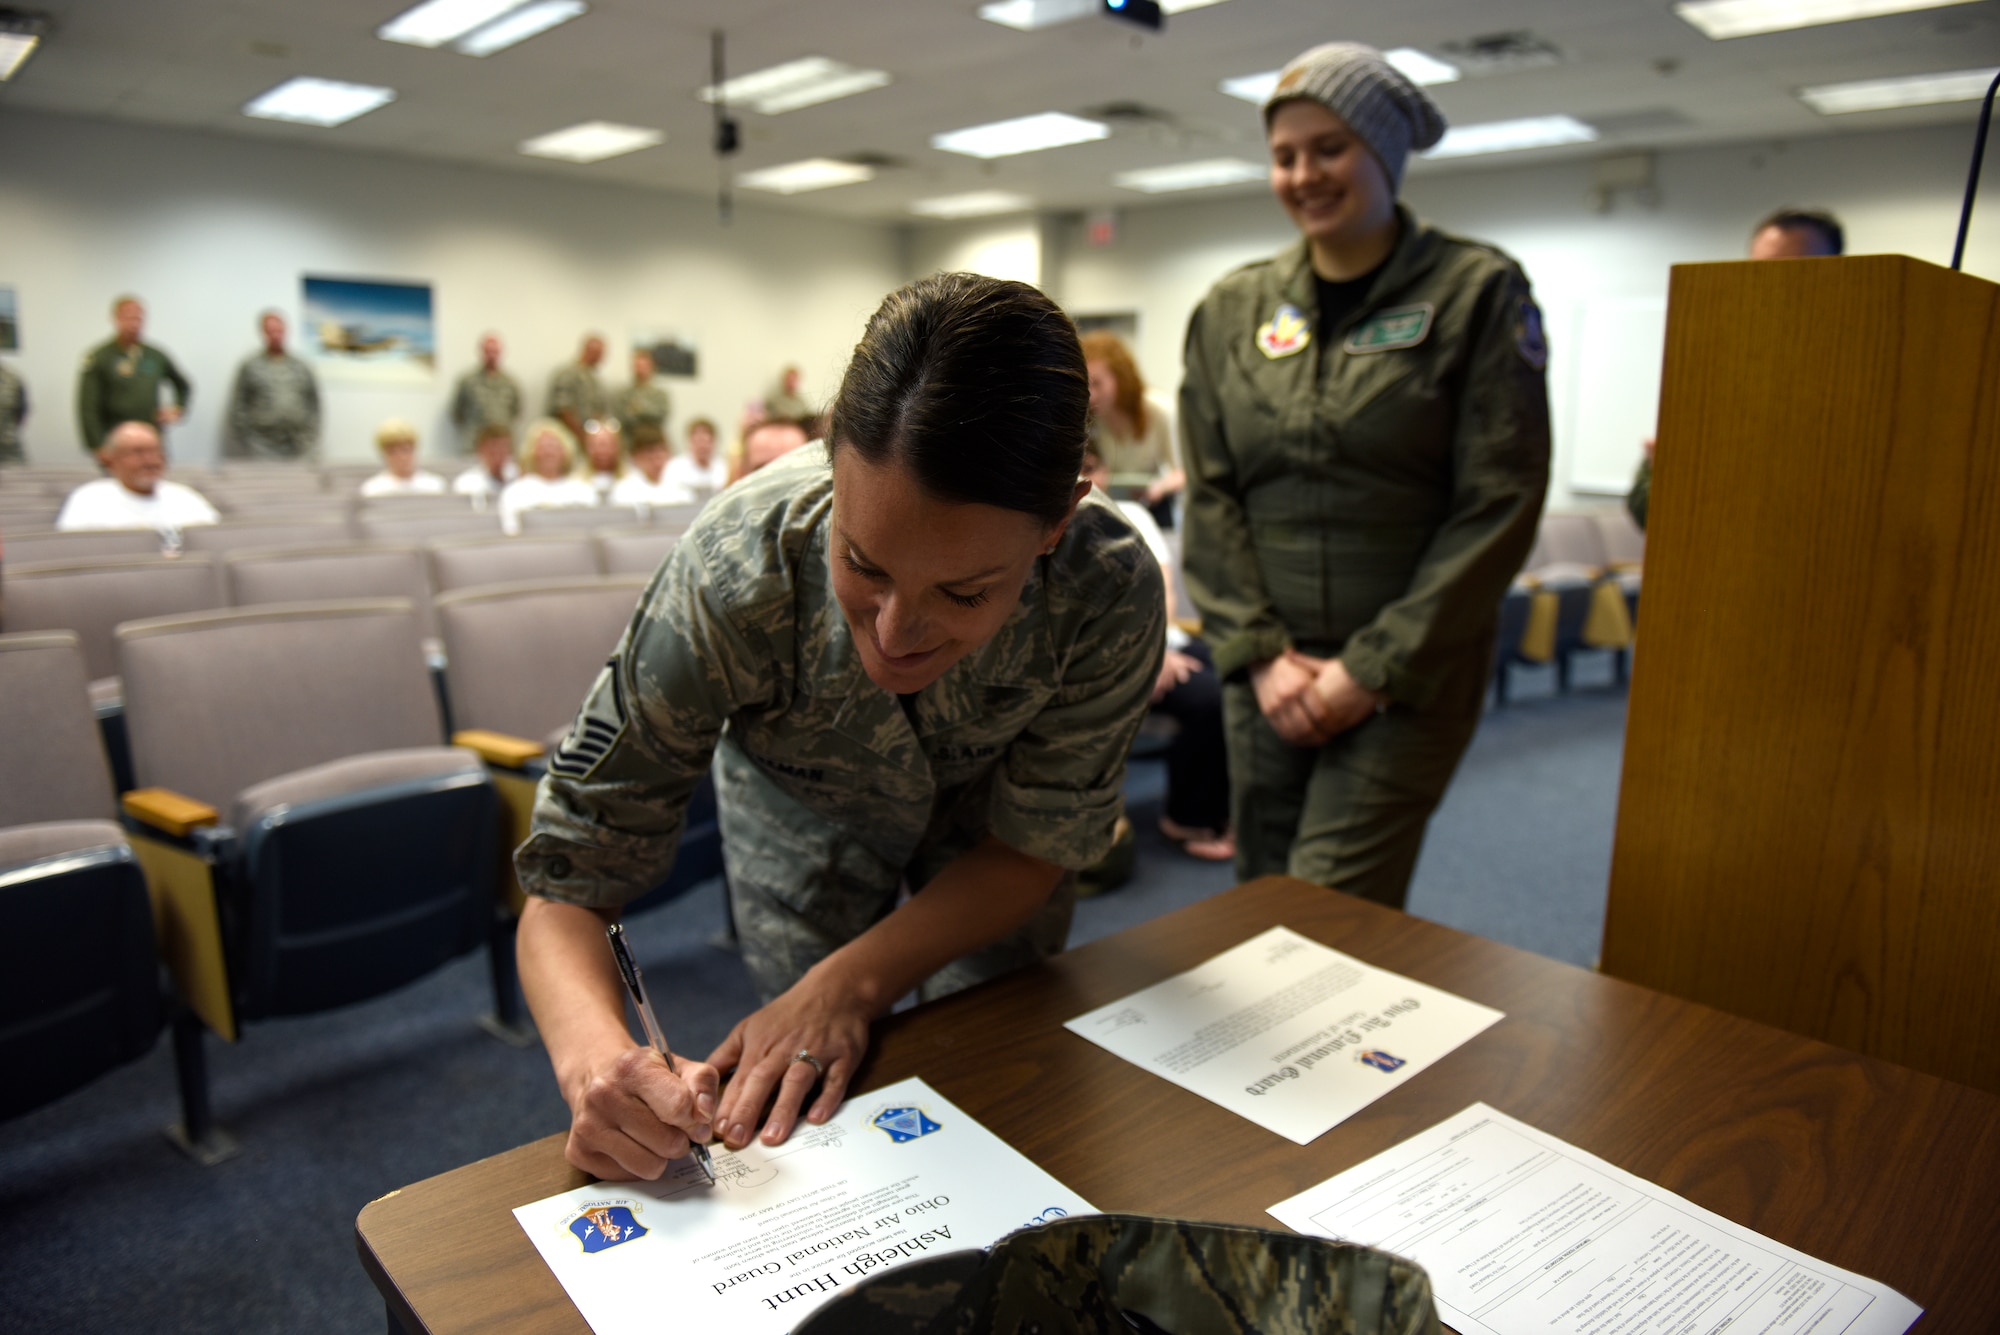 U.S. Air Force Master Sgt. Robin L. Wiseman, a recruiting and retention manager assigned to the 180th Fighter Wing, signs the oath of enlistment May 26, 2016 after commissioning Ashleigh Hunt as an honorary 2nd Lt. in the Ohio Air National Guard during the first-ever Pilot for a Day event at the 180FW. The Pilot for a Day program is a way for the 180FW to support the local community by providing a fun-filled day for children and young adults living with chronic or life-threatening disease or illness. (U.S. Air National Guard photo by Staff Sgt. Shane Hughes)